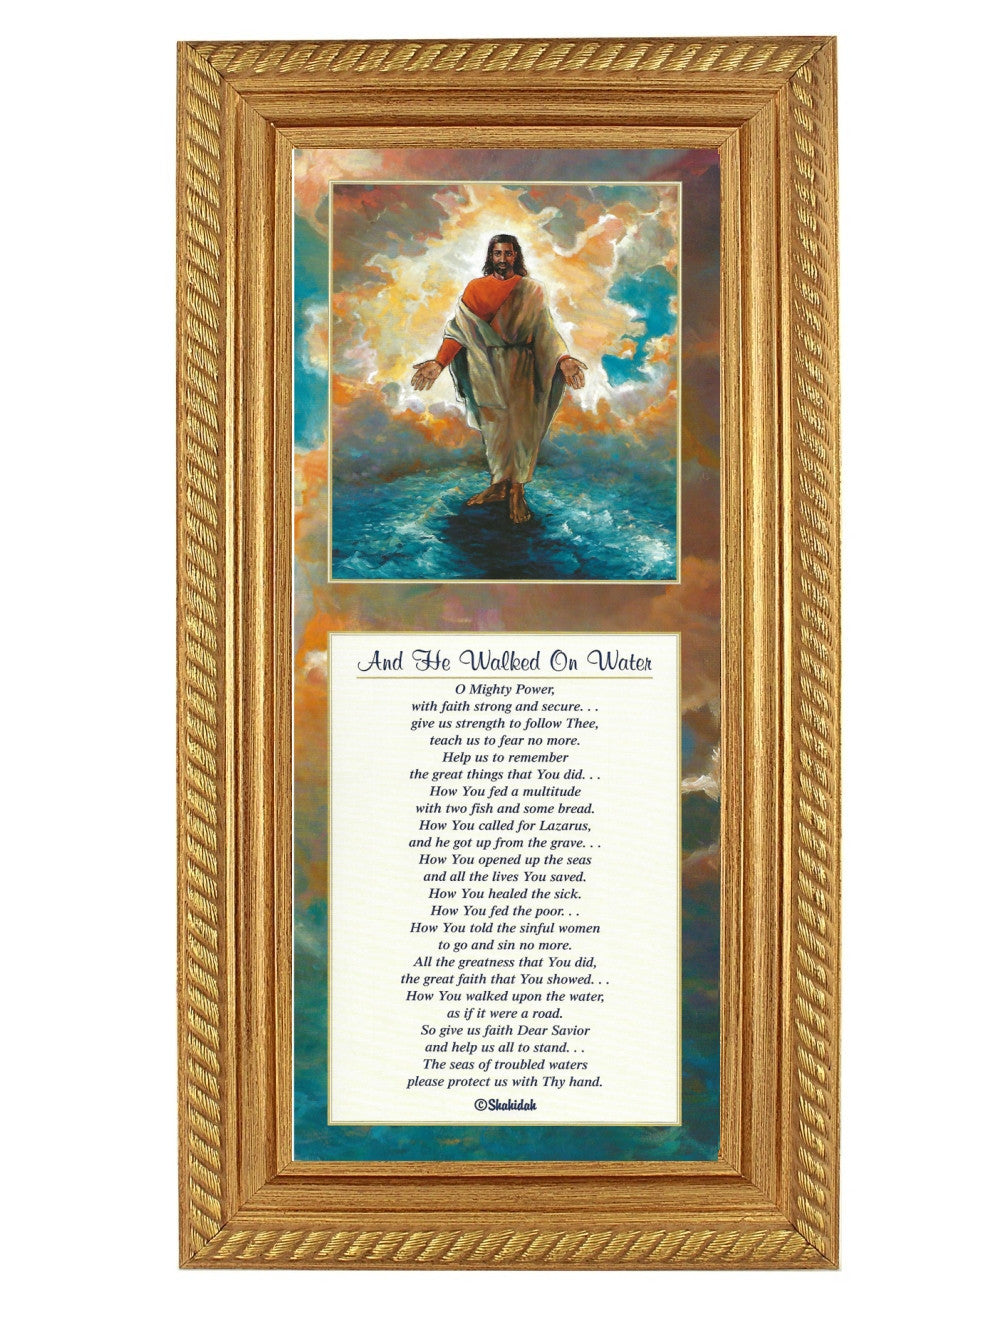 2 of 2: And He Walked on Water by Katherine Roundtree and Shahidah (Gold Frame)